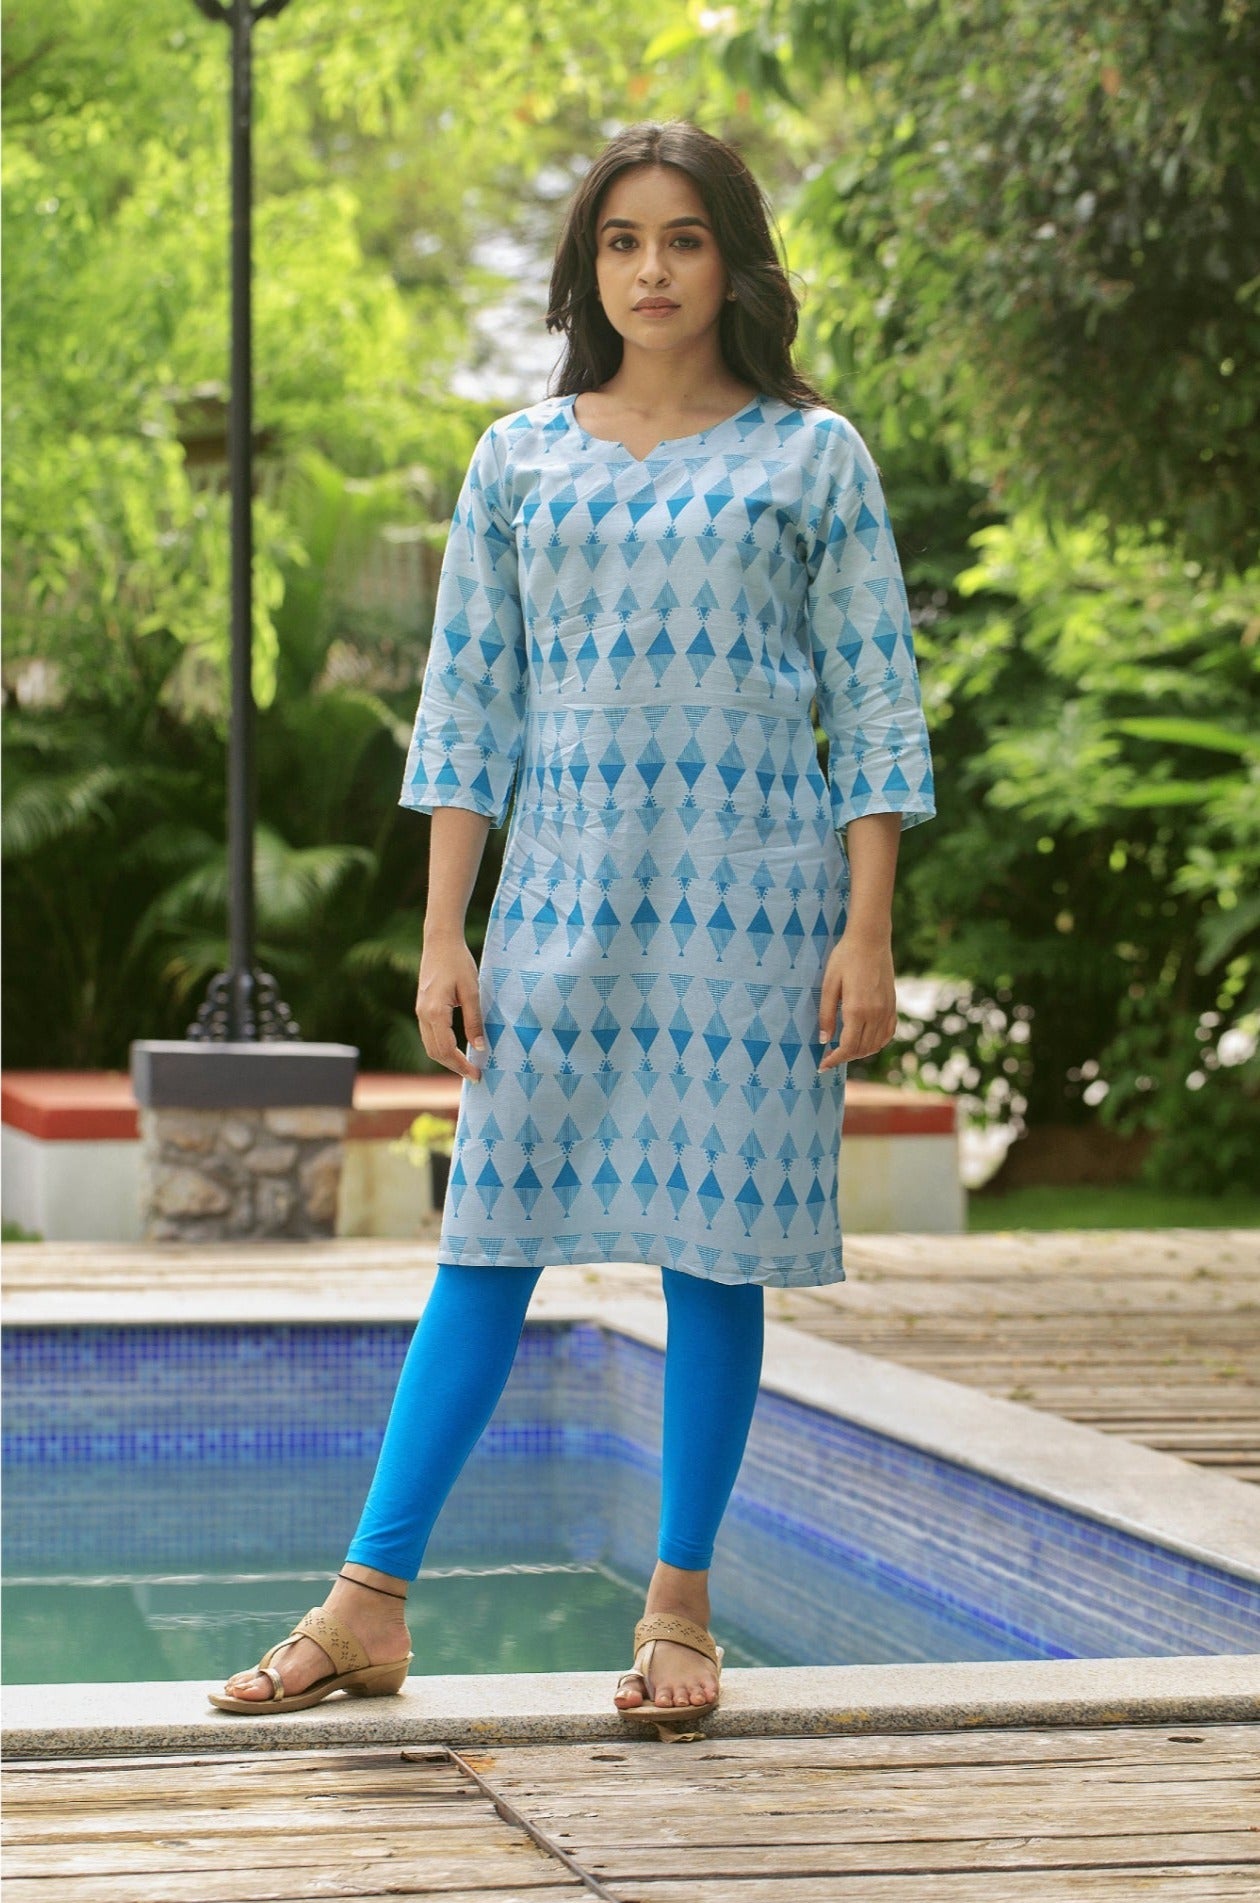 15 Types Of Latest Kurti Designs and Styling Tips - That's Indian